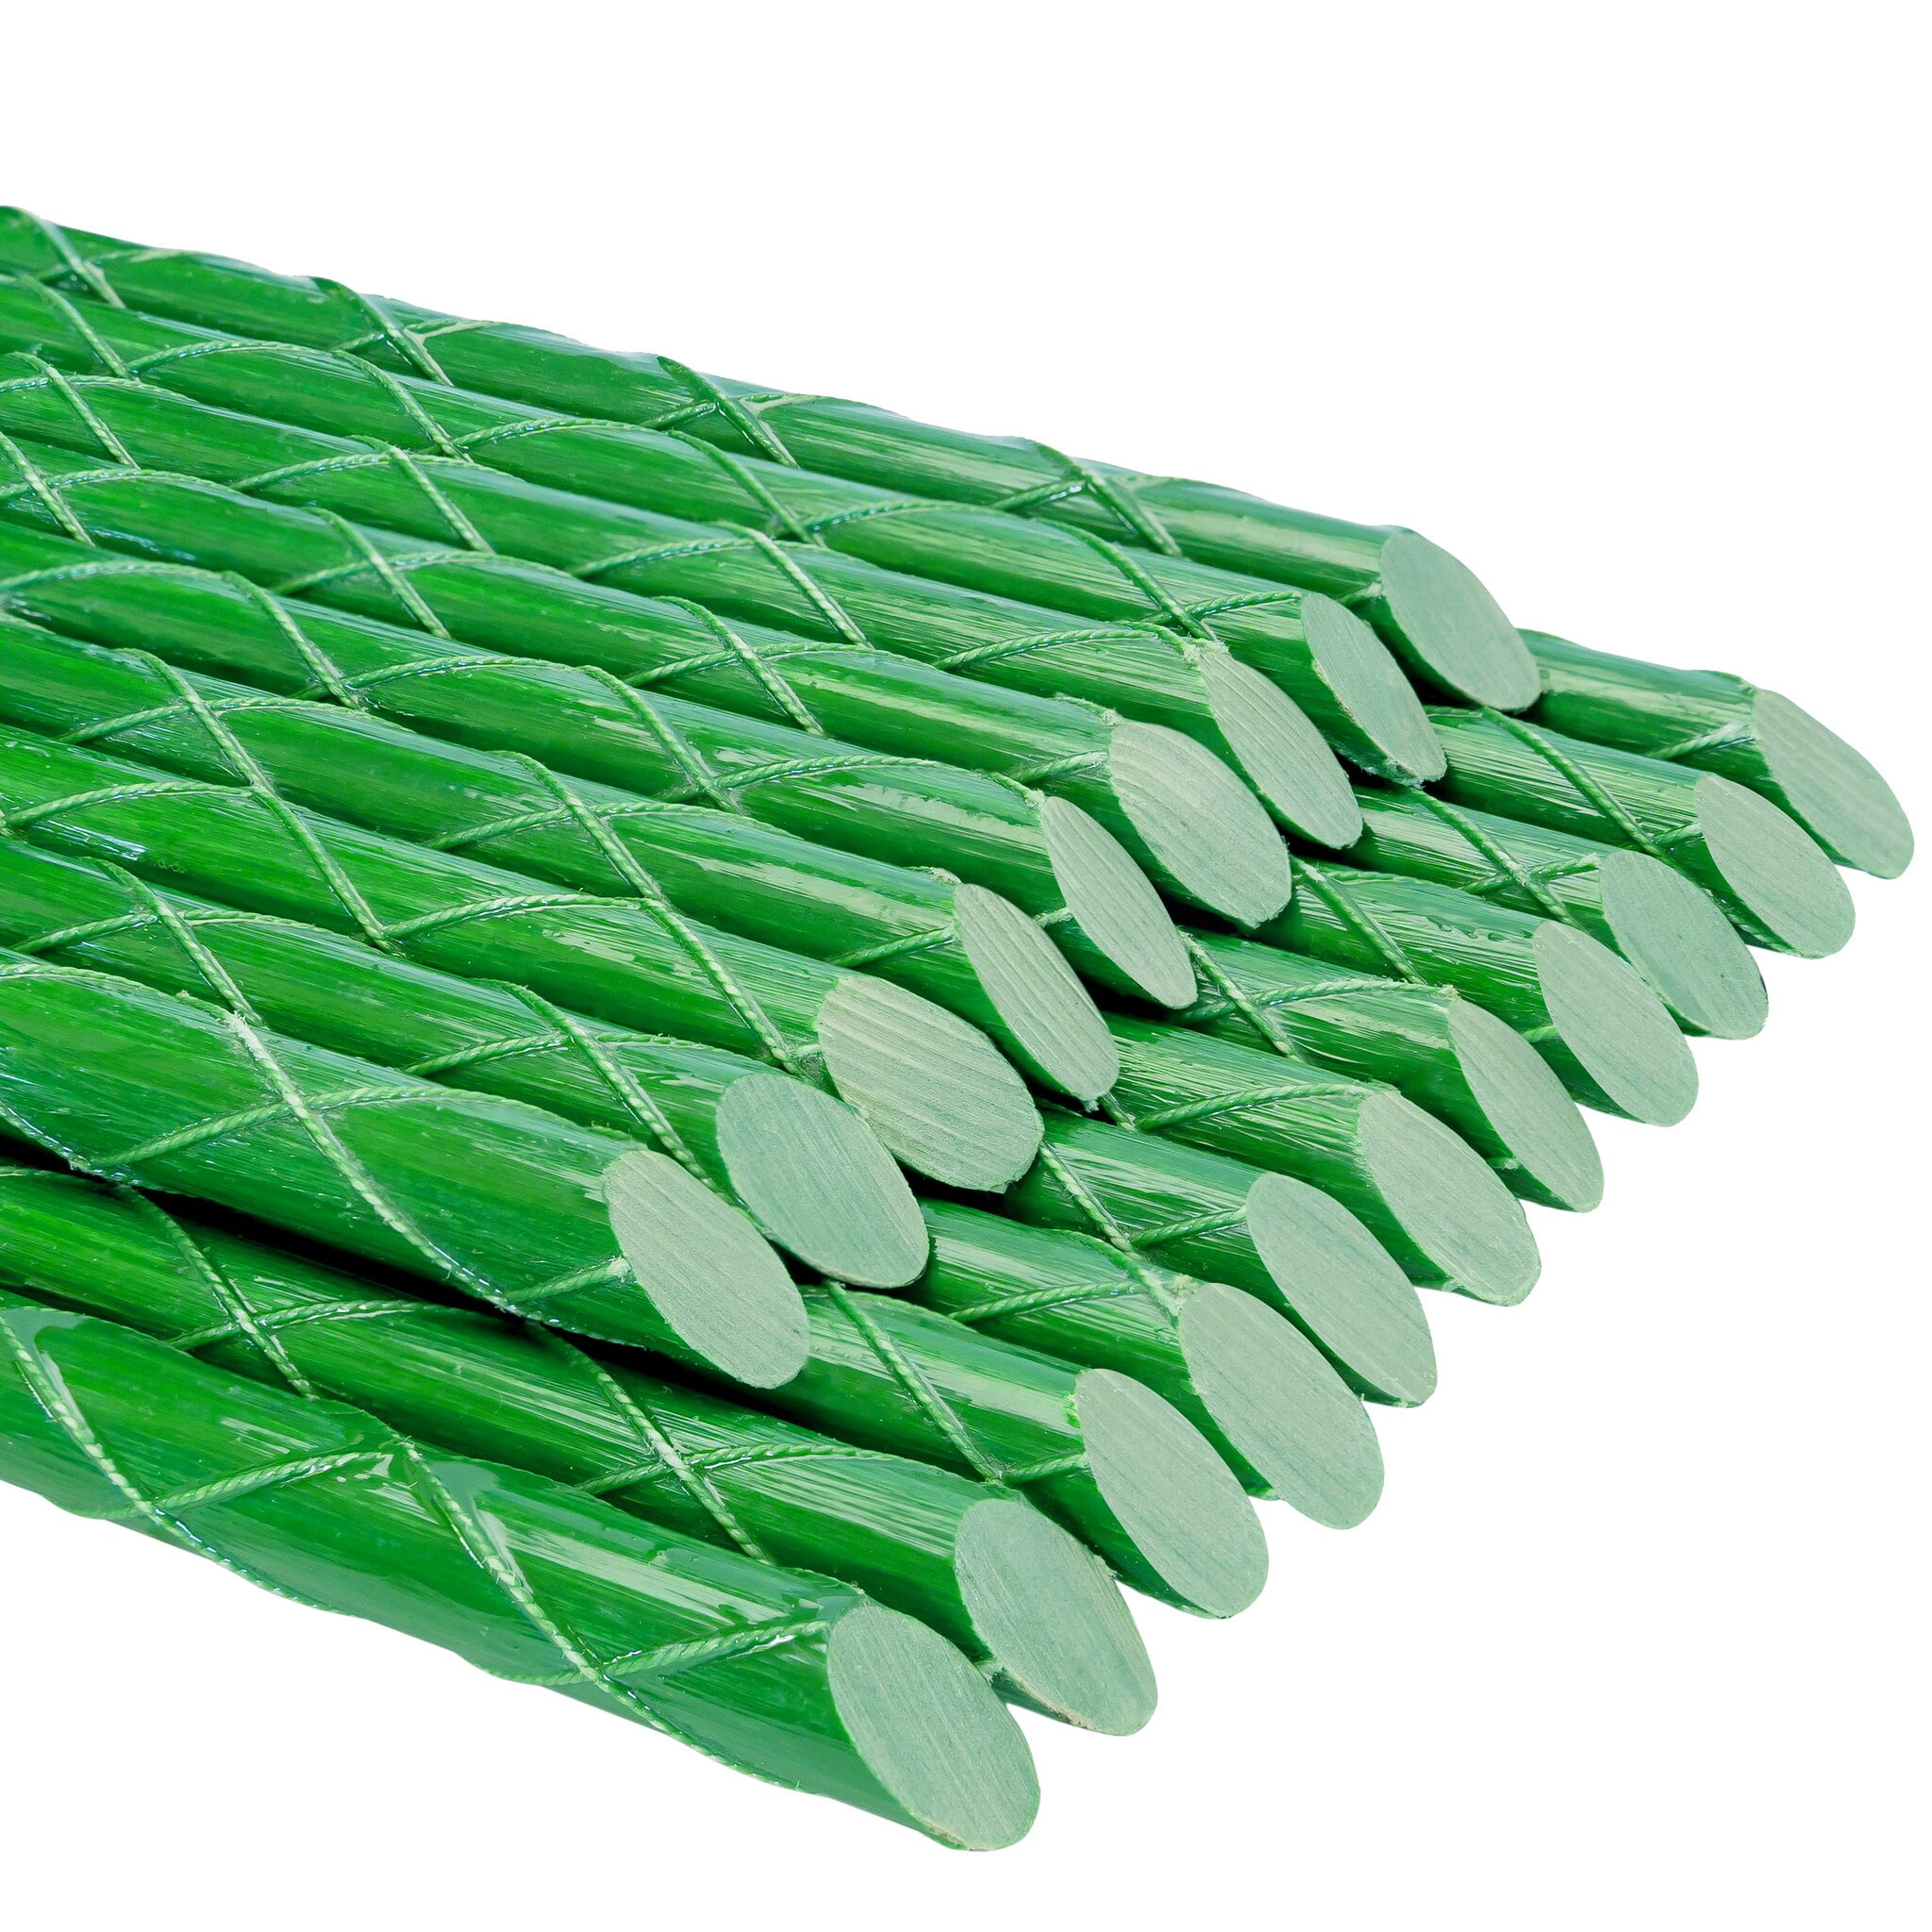 Rust-free Garden Plant Stakes Post for Tomatoes 11mm Dia,3ft 10pack,Green 